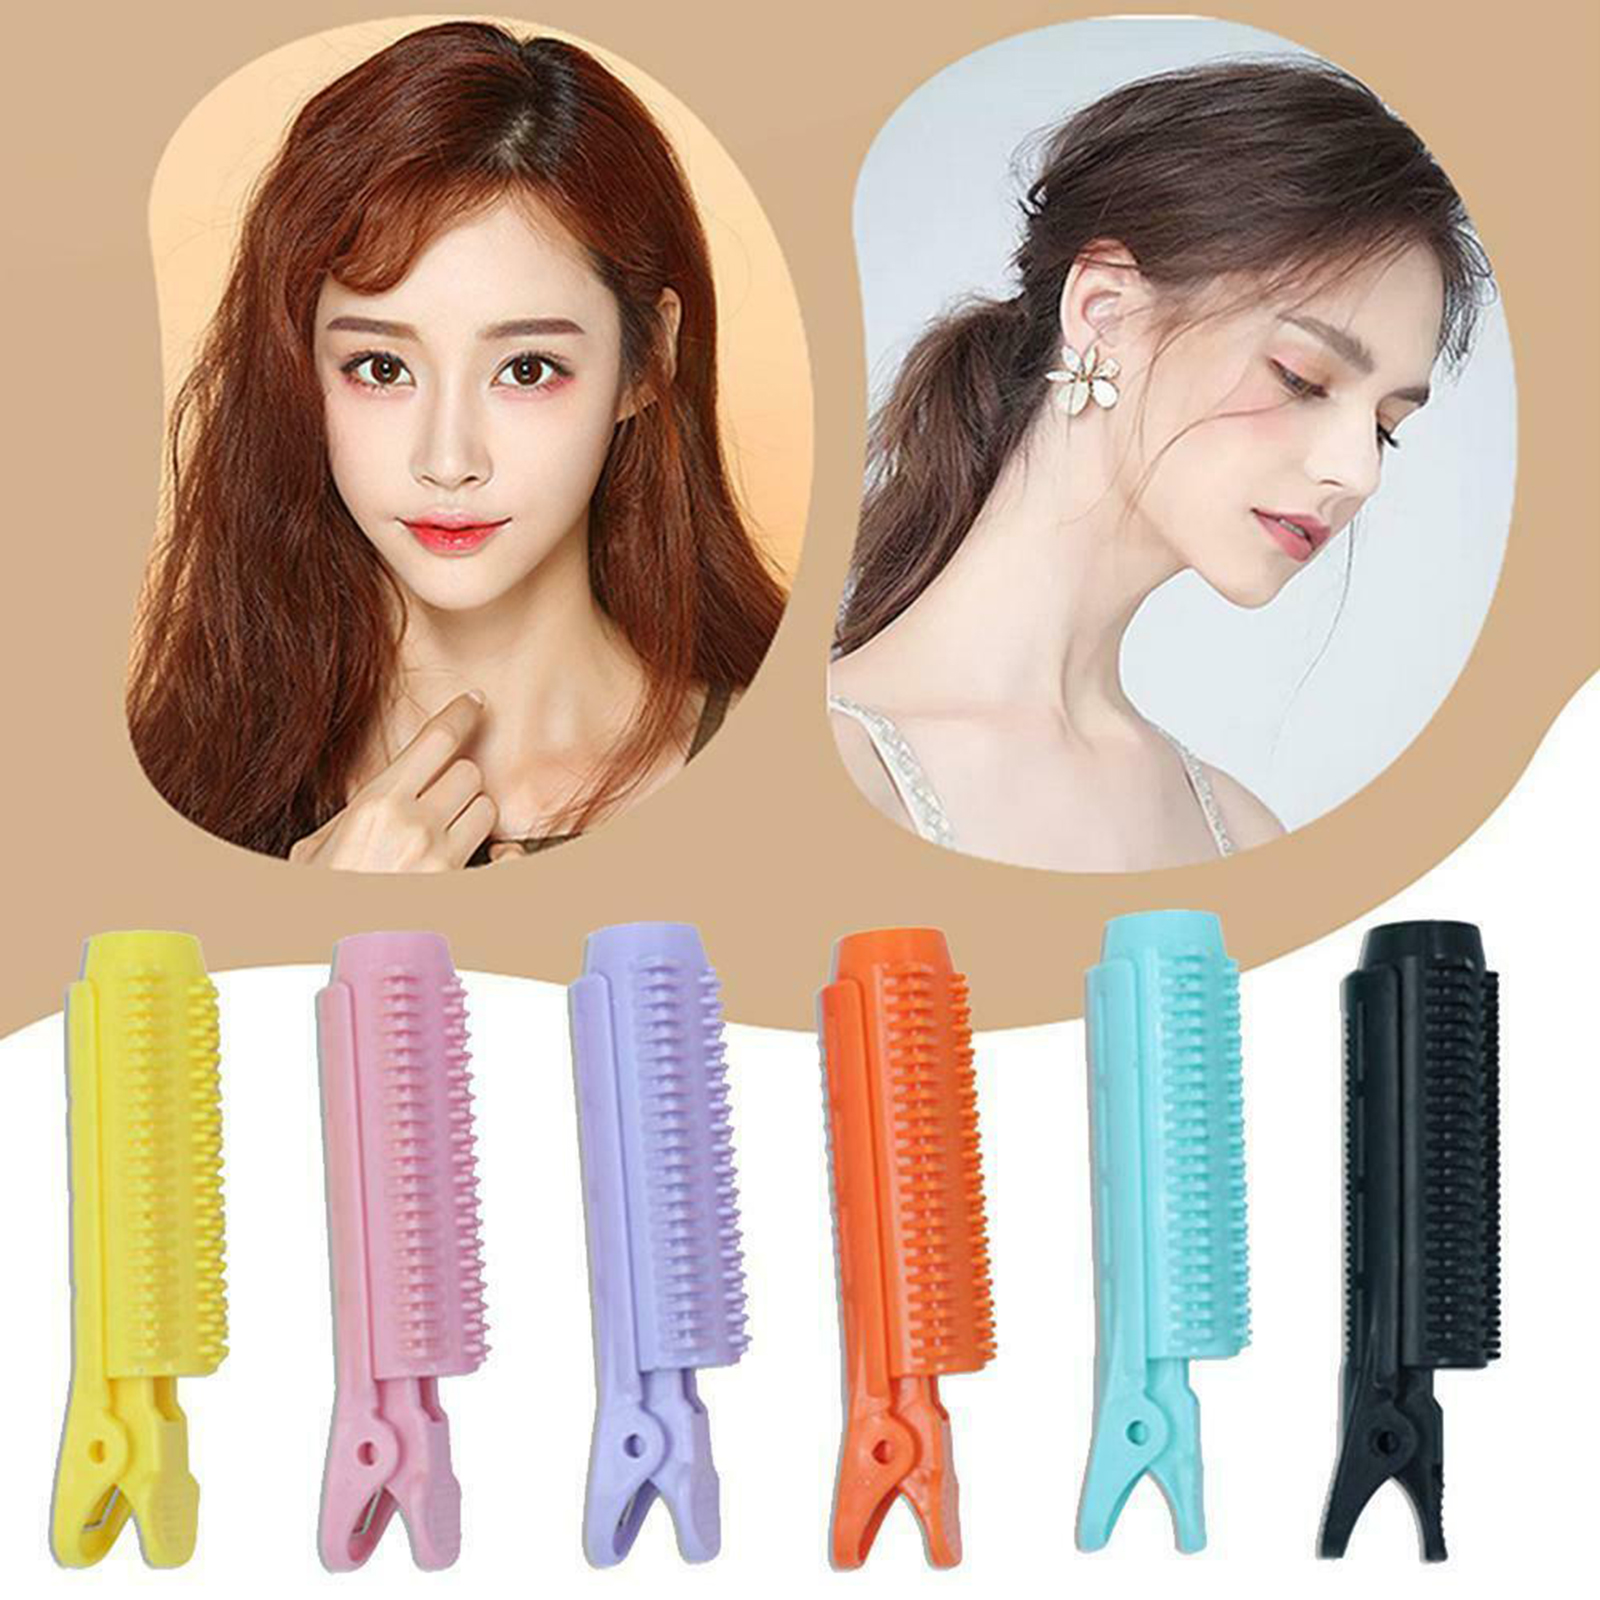 Aibecy 6 Pcs Styling Curling Clip Self Grip Root Volume Fluffy Hair Curler Clip Perm for Hair Styling - image 2 of 7